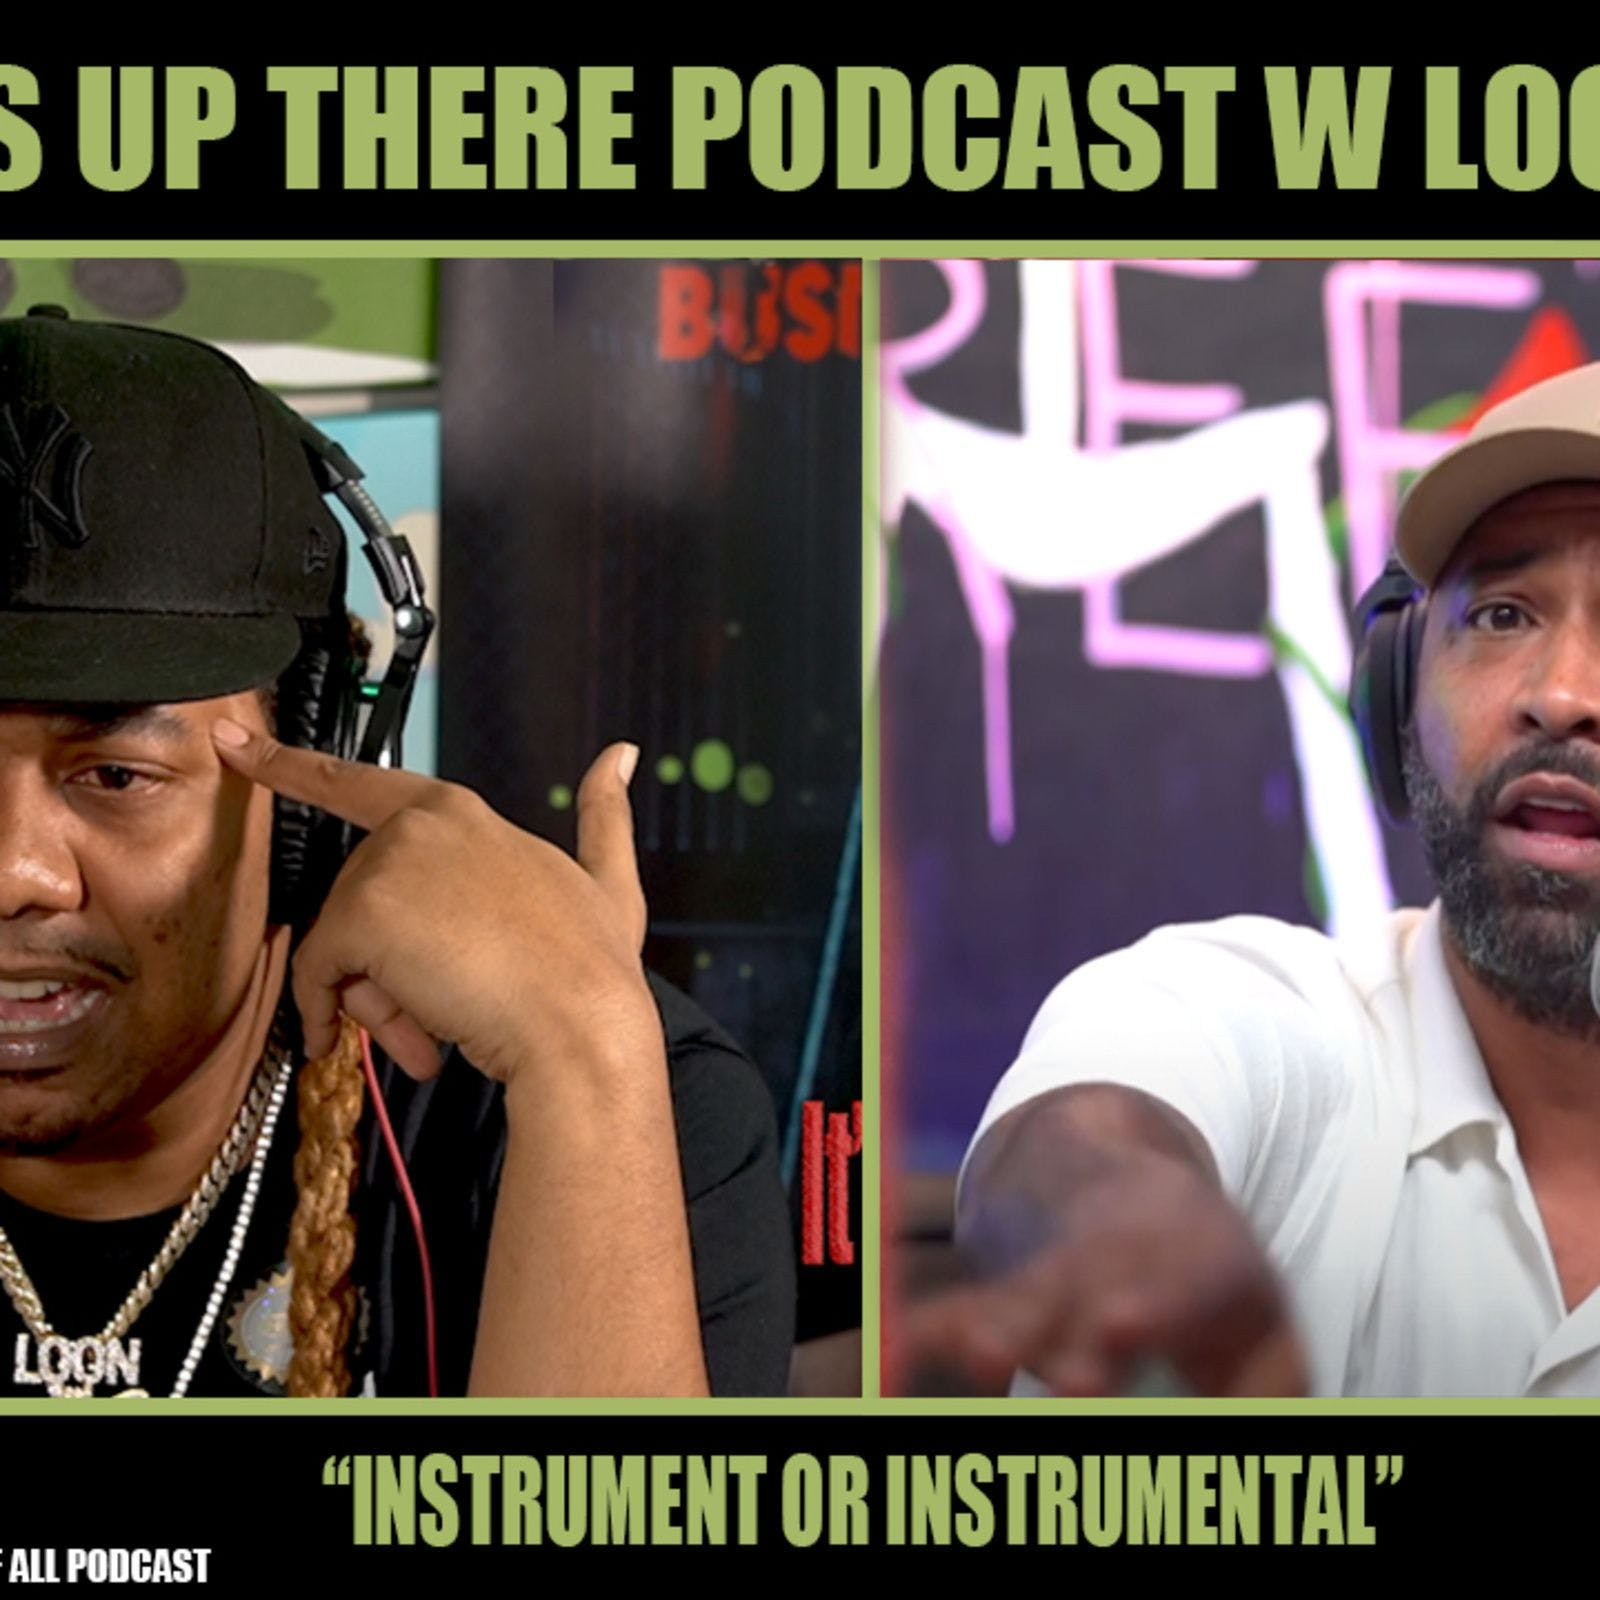 ITS UP THERE PODCAST EP 47 | A INSTRUMENT OR INSTRUMENTAL| RAPE ALLEGATIONS IS LIKE AN FELONY FOR A CELEBRITY| JOE BUDDEN PREPARING BUSINESS TO BE SUED | MANIO AND B DOT| INCOME AND OUTPUT